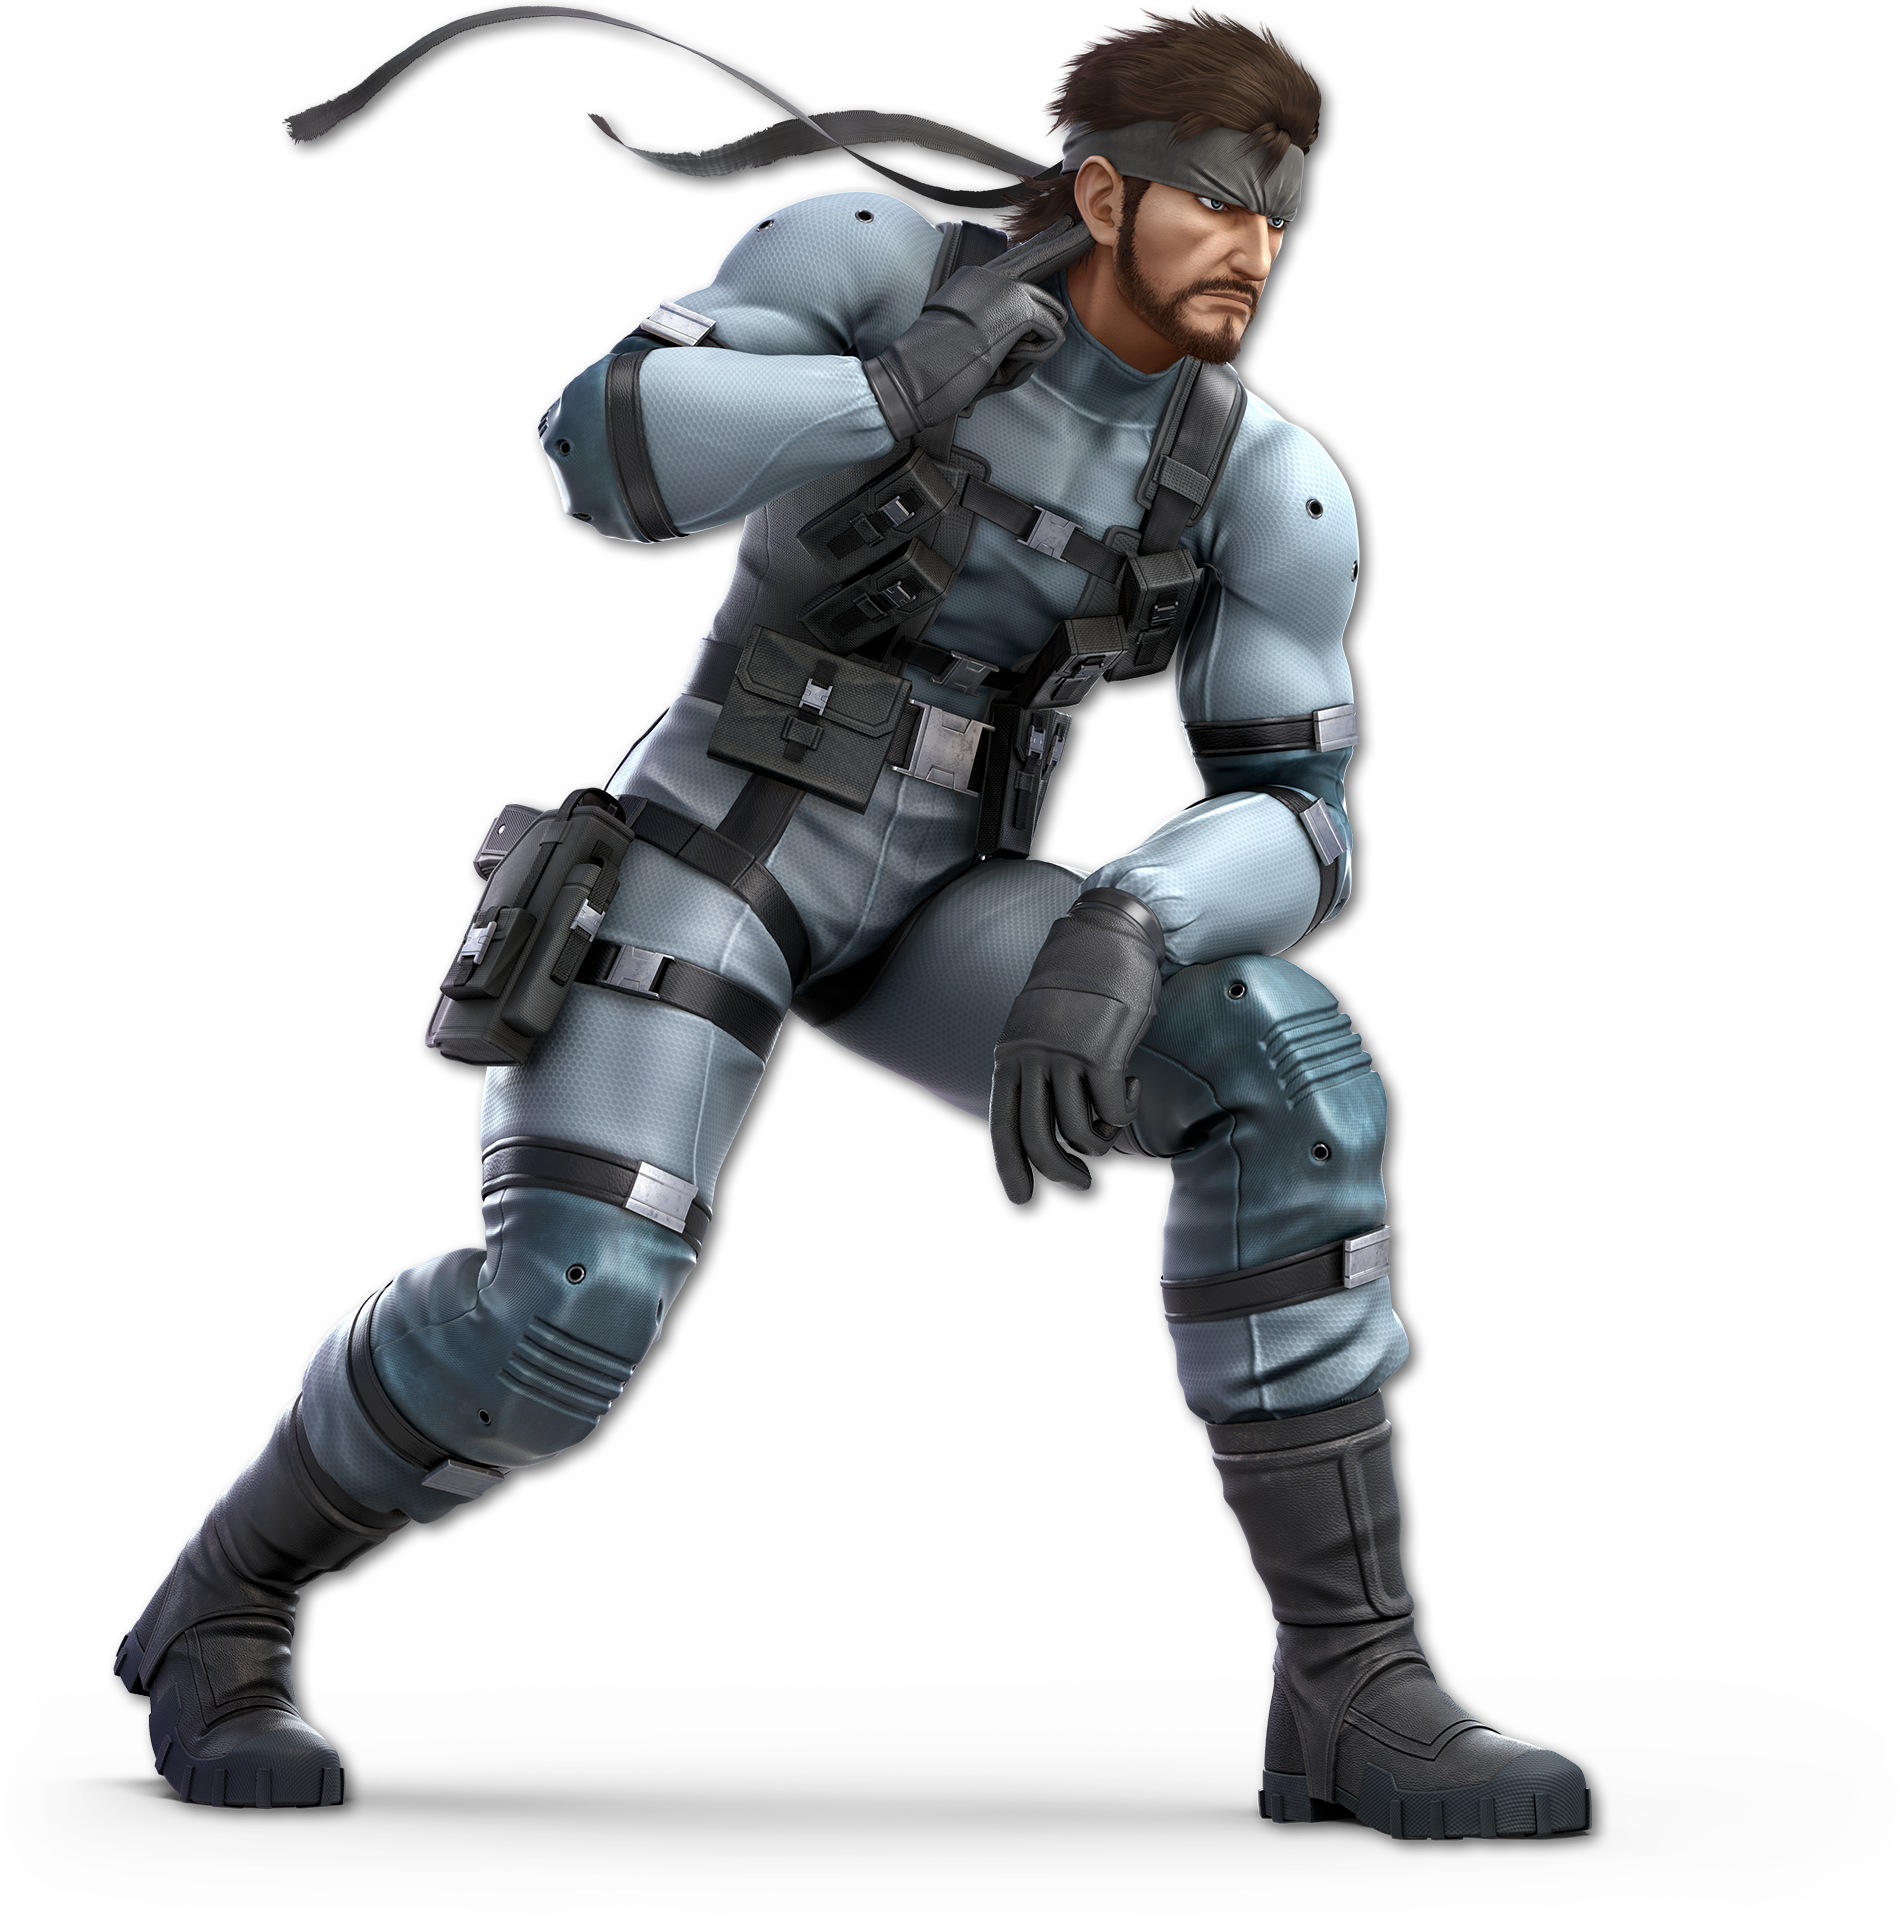 Solid Snake, Heroes Wiki